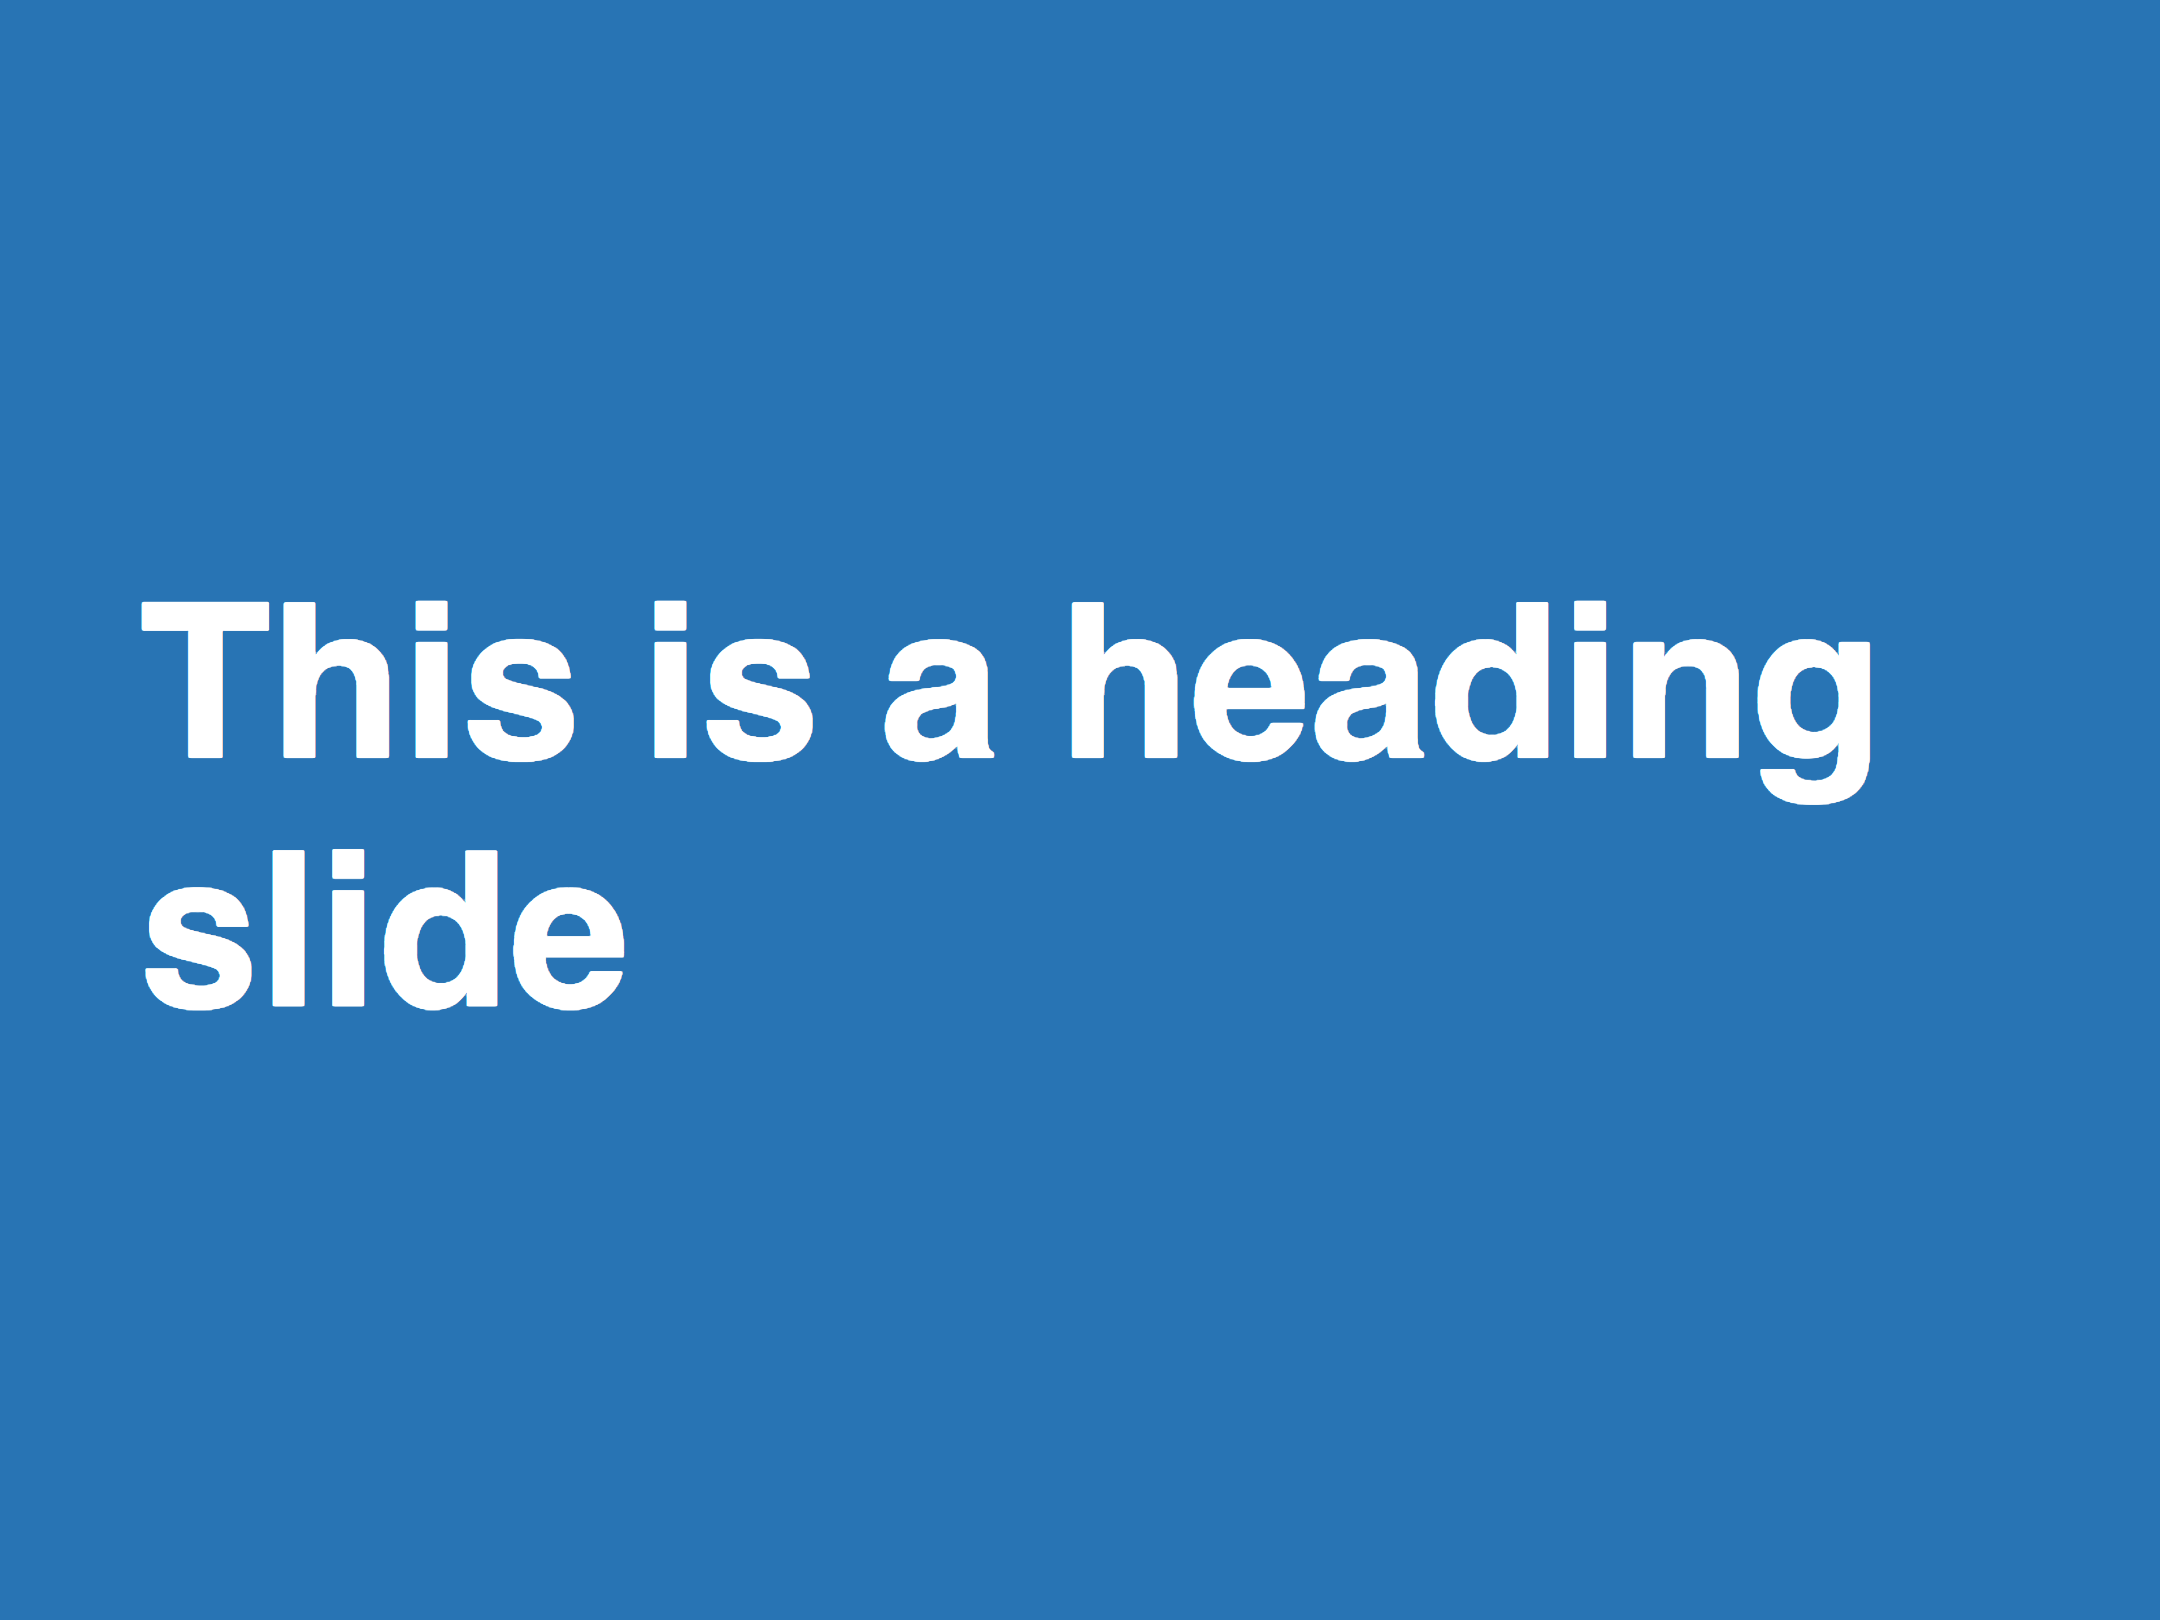 The heading slide, which is blue with large white overlaid text reading 'this is a heading slide'.